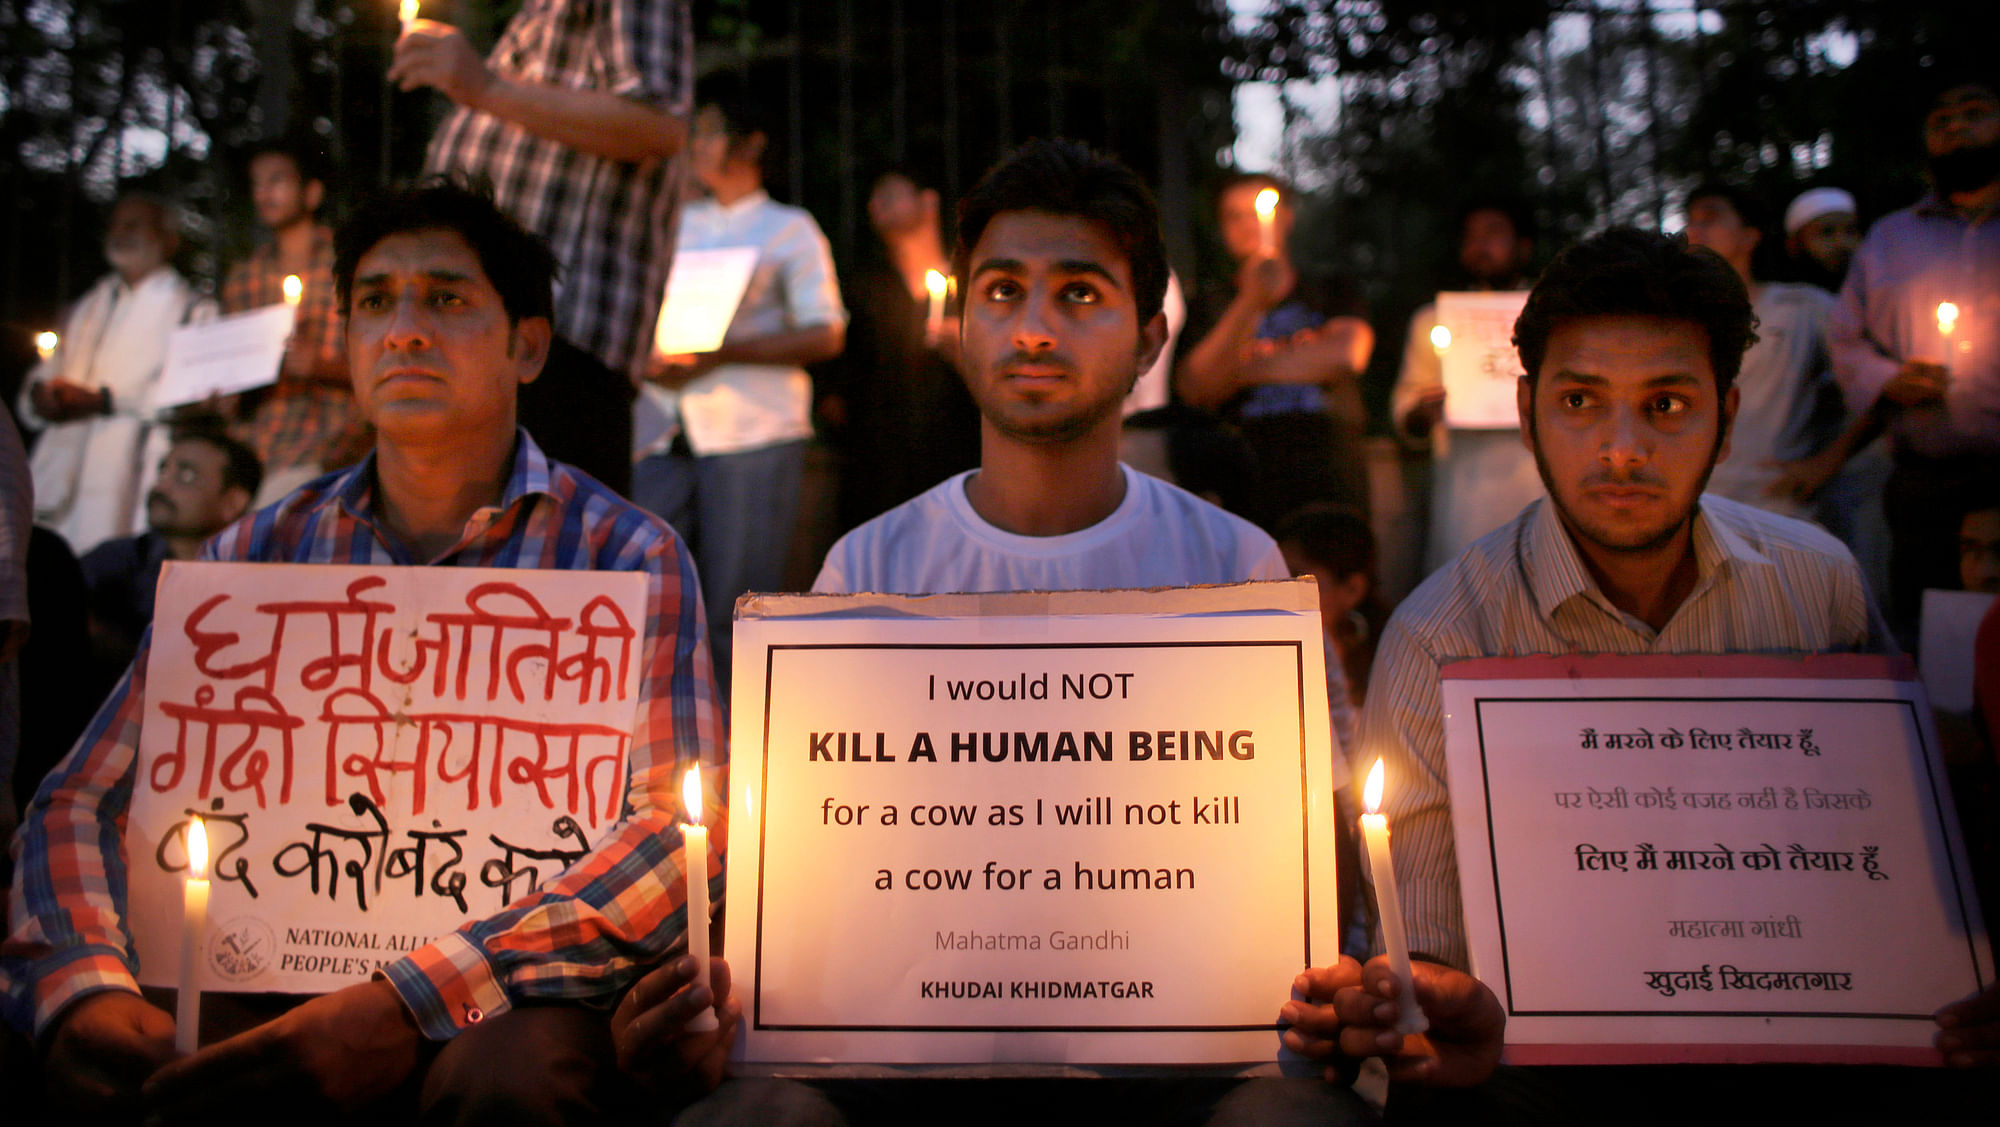 Participants in a candlelight vigil in memory of 52-year-old Muslim farmer Mohammad Akhlaq who was lynched by a mob. (Photo: AP)